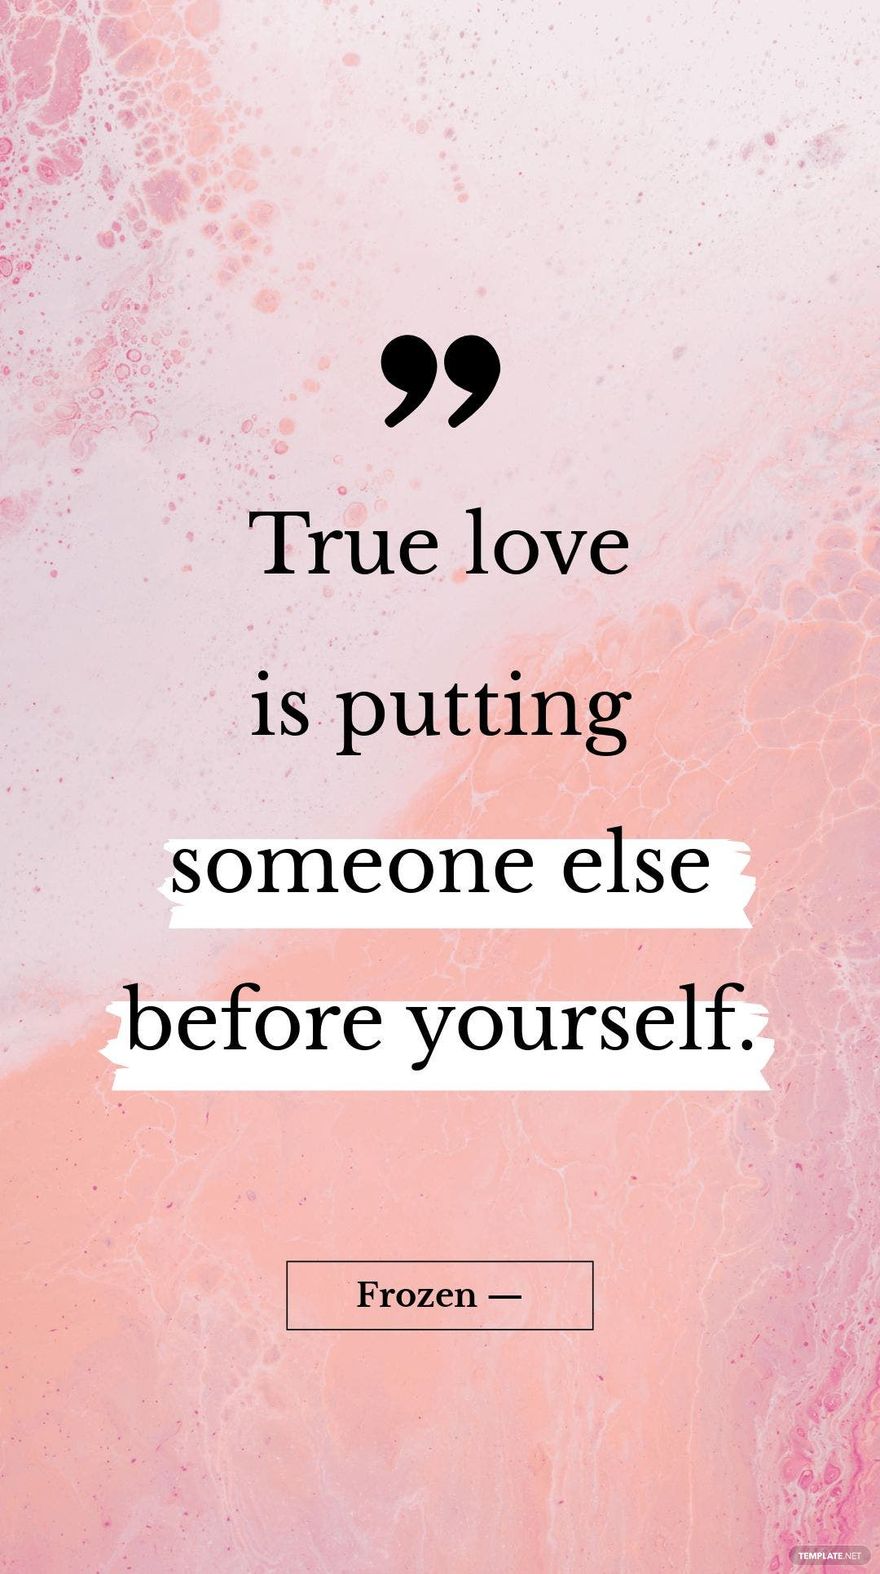 Frozen — "True love is putting someone else before yourself."